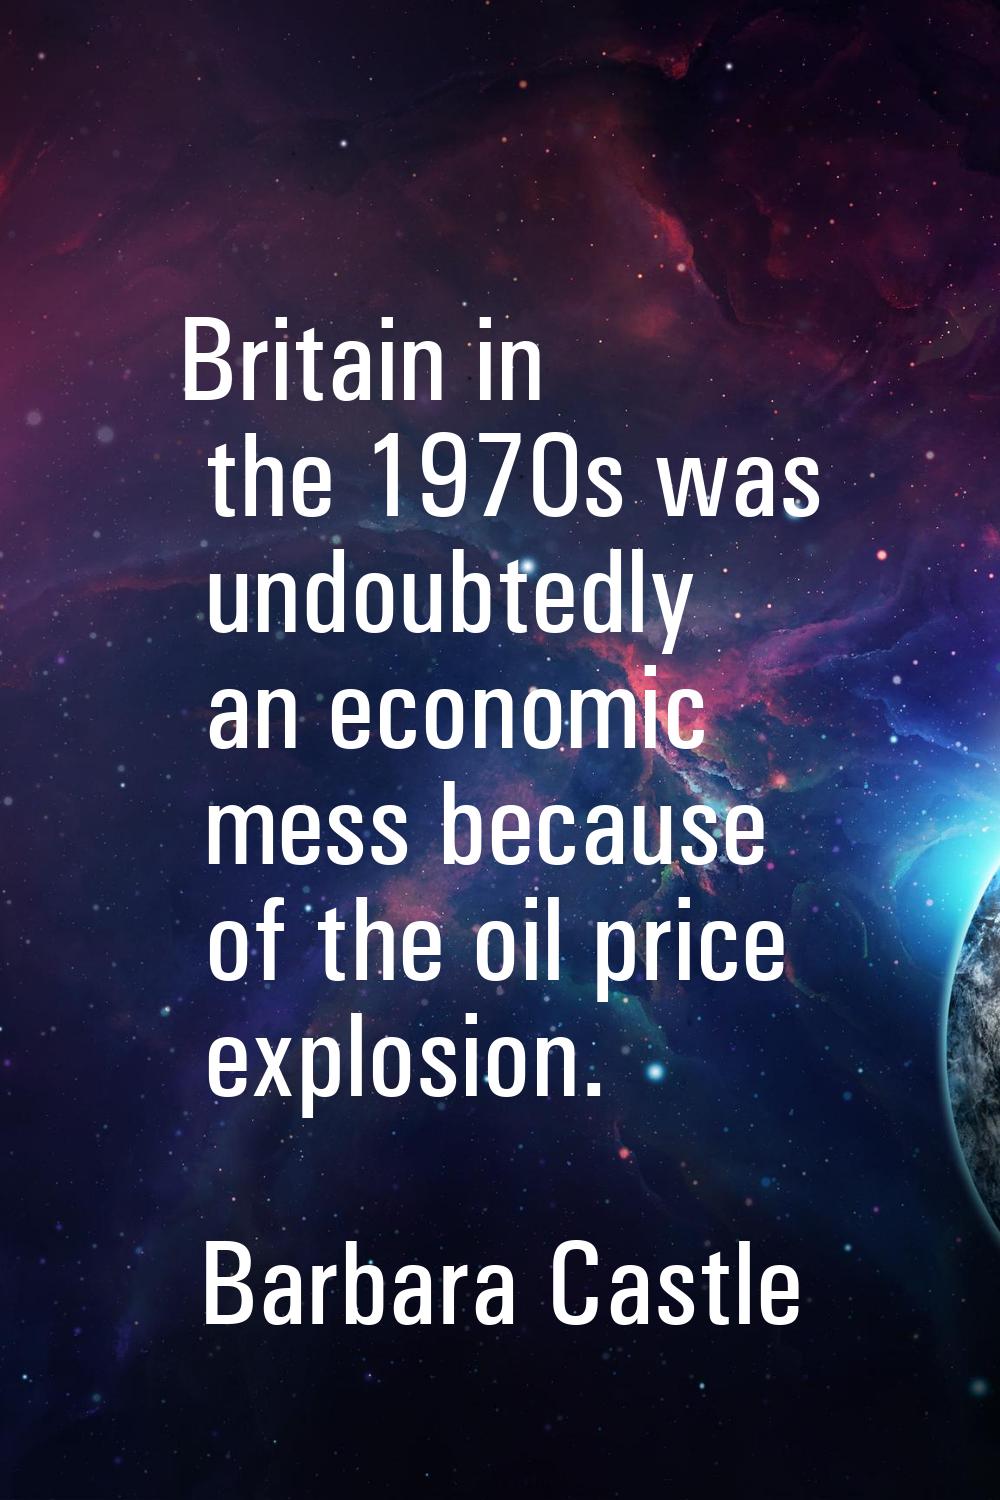 Britain in the 1970s was undoubtedly an economic mess because of the oil price explosion.